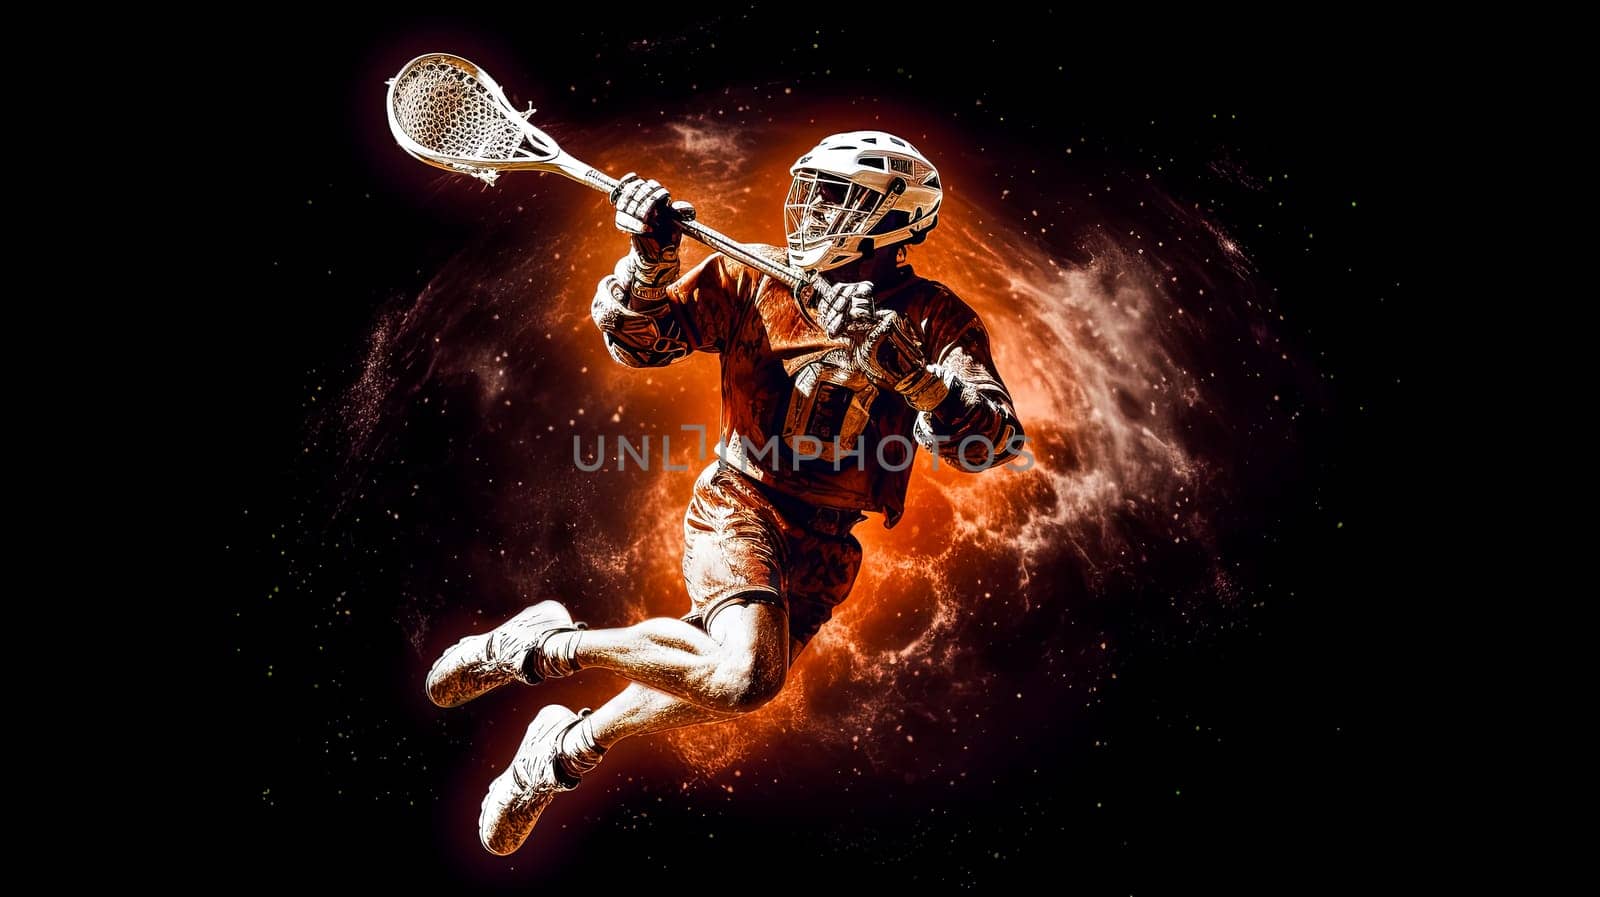 An astronaut playing lacrosse on a beautiful alien planet is a stock illustration that captures the whimsical concept of space exploration and recreation.